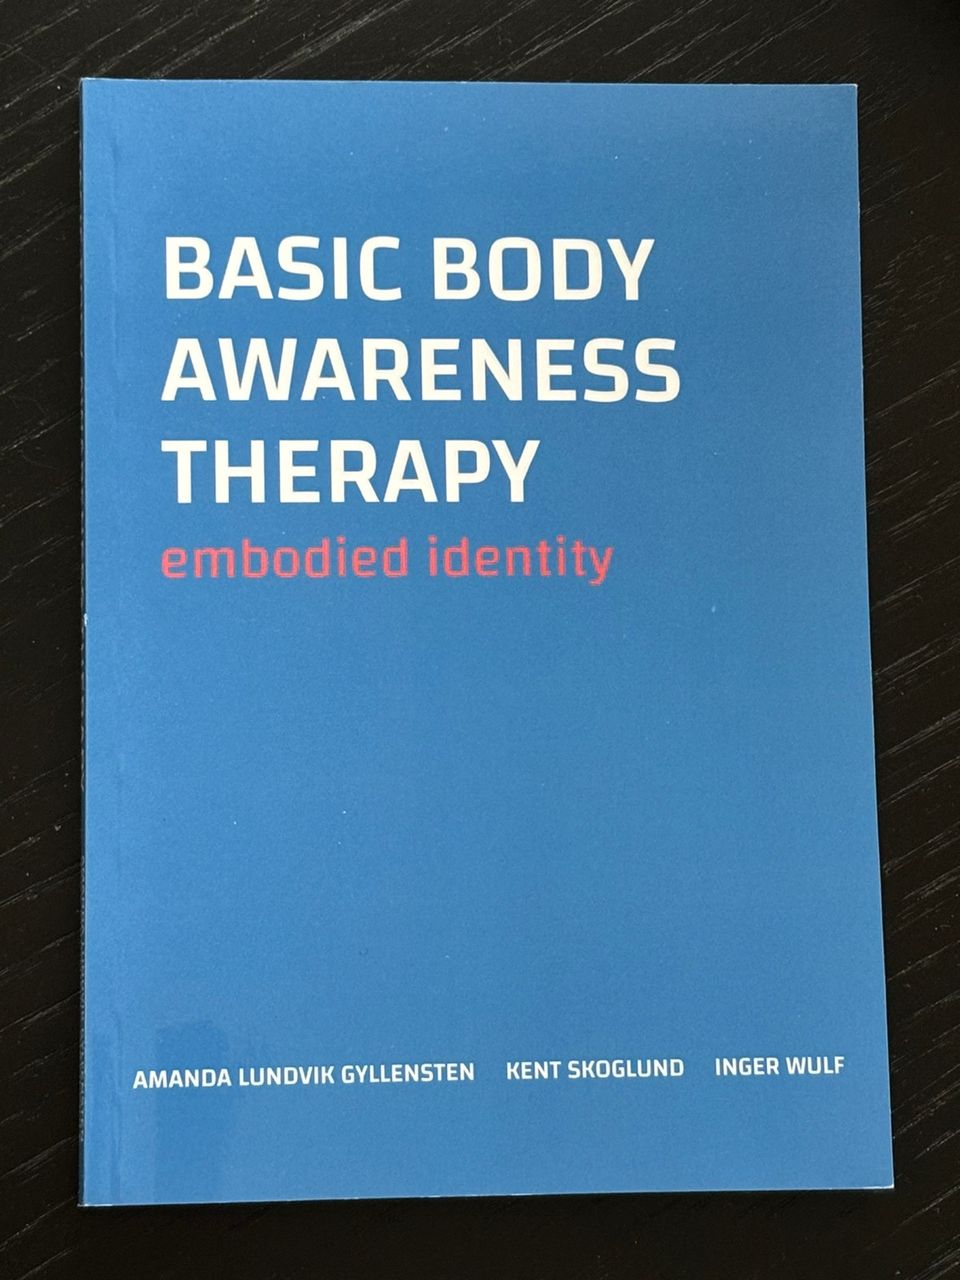 Basic Body Awareness Therapy